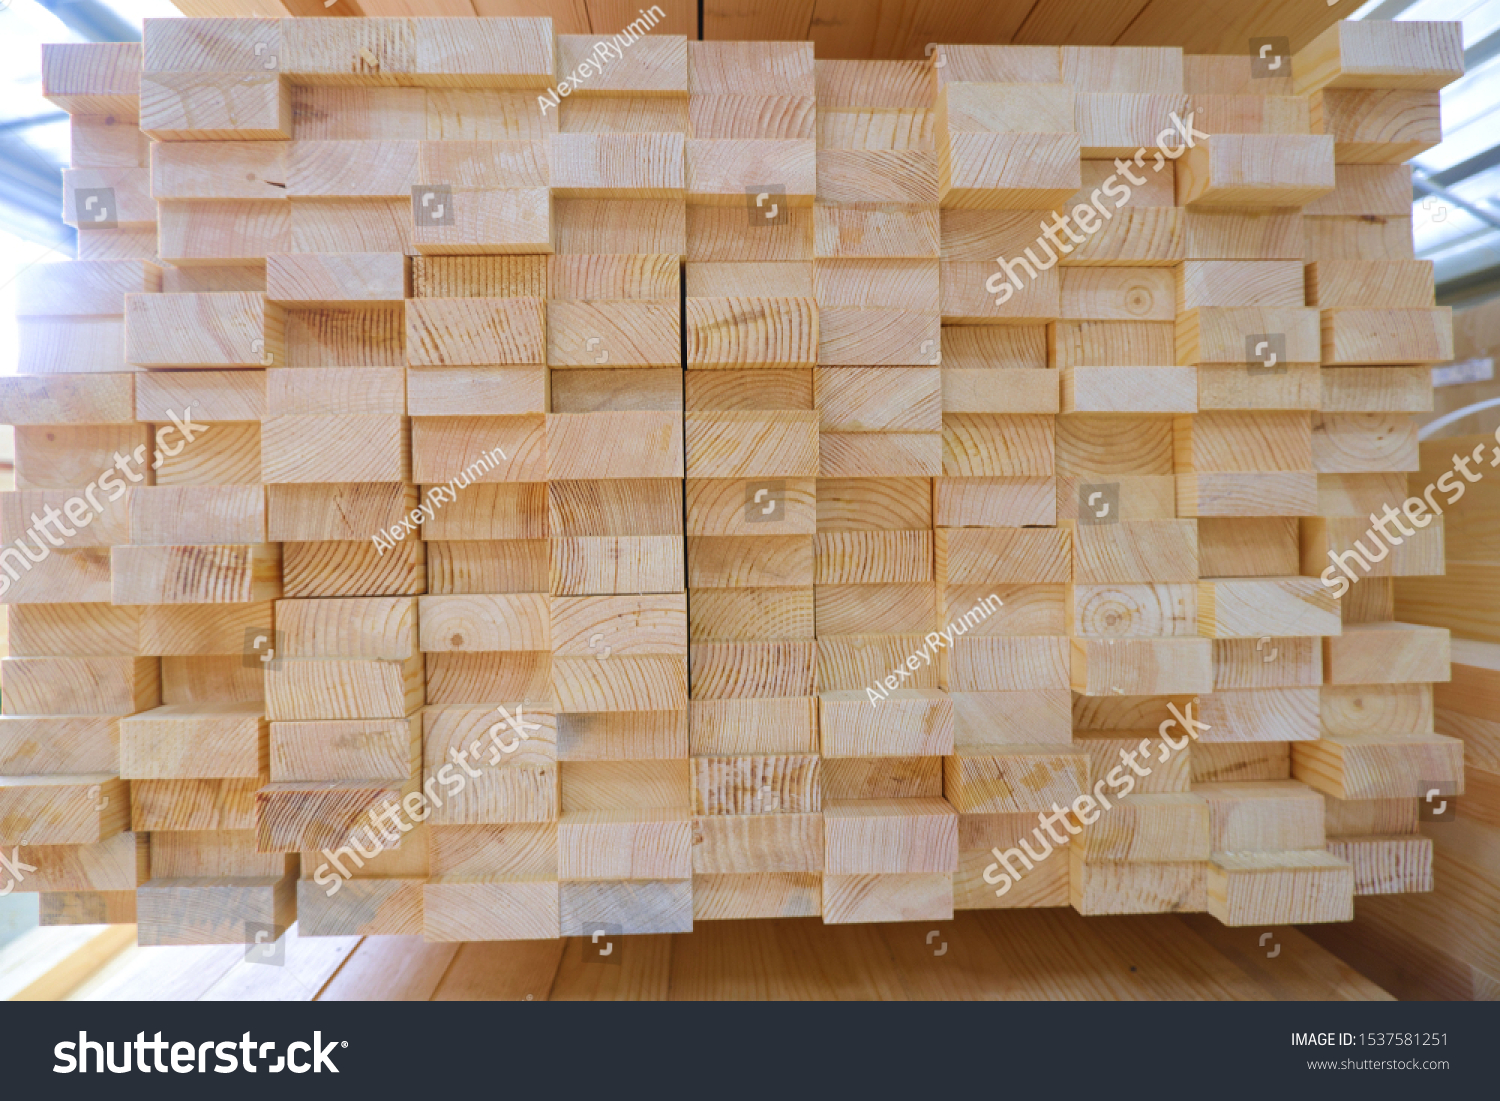 Stack of two-layer wooden glued laminated timber beams from pine finger joint spliced boards for wooden windows